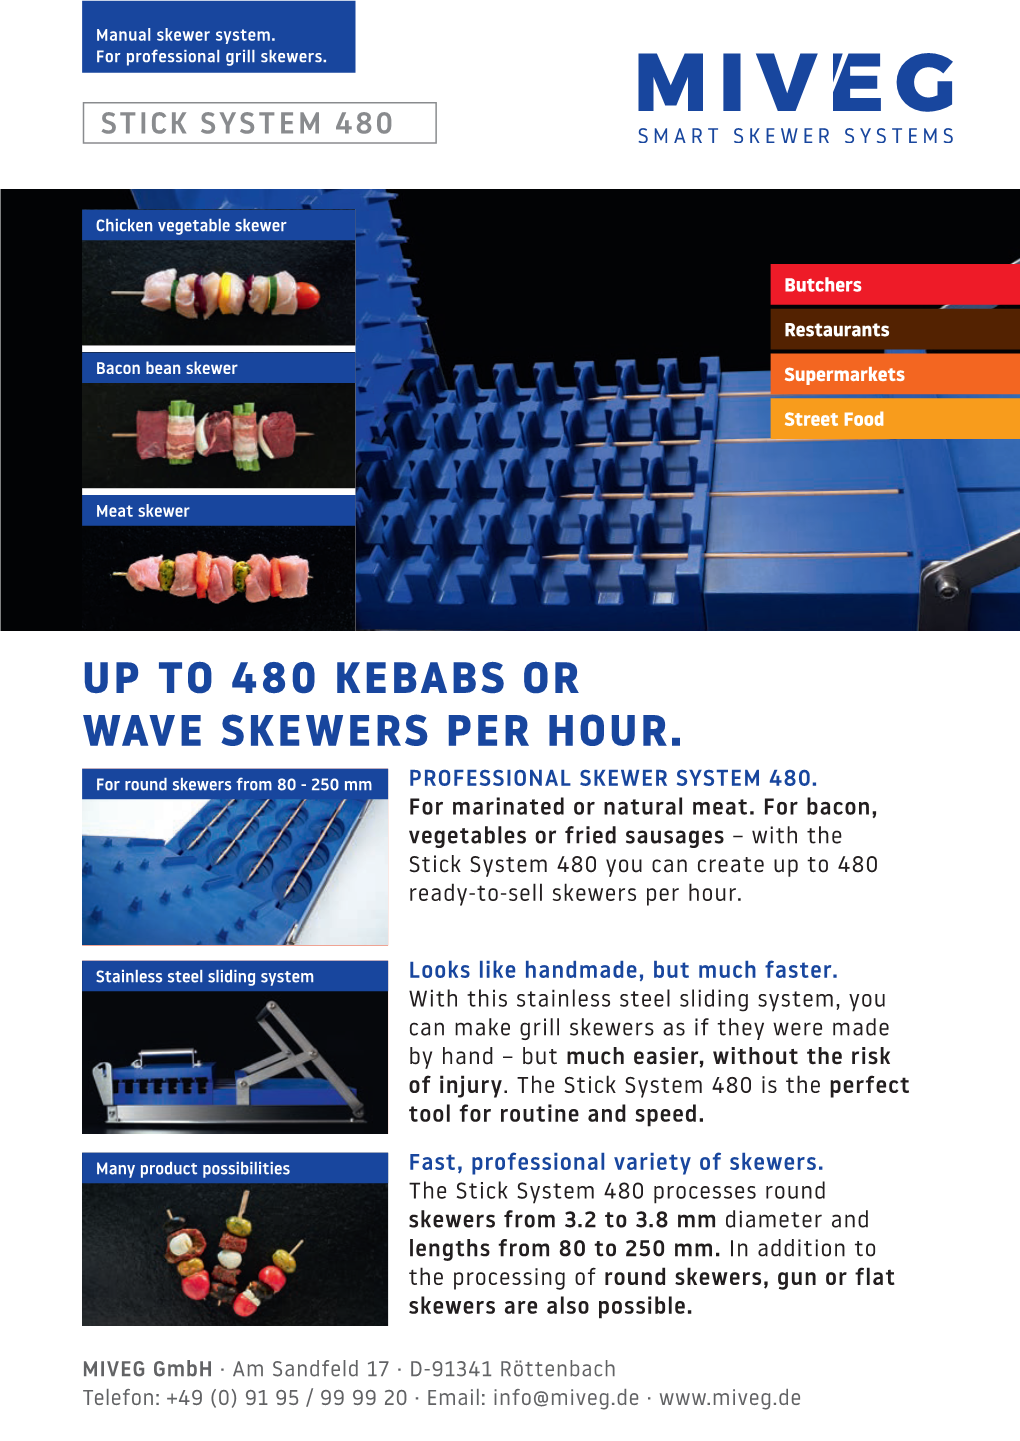 UP to 480 KEBABS OR WAVE SKEWERS PER HOUR. for Round Skewers from 80 - 250 Mm PROFESSIONAL SKEWER SYSTEM 480